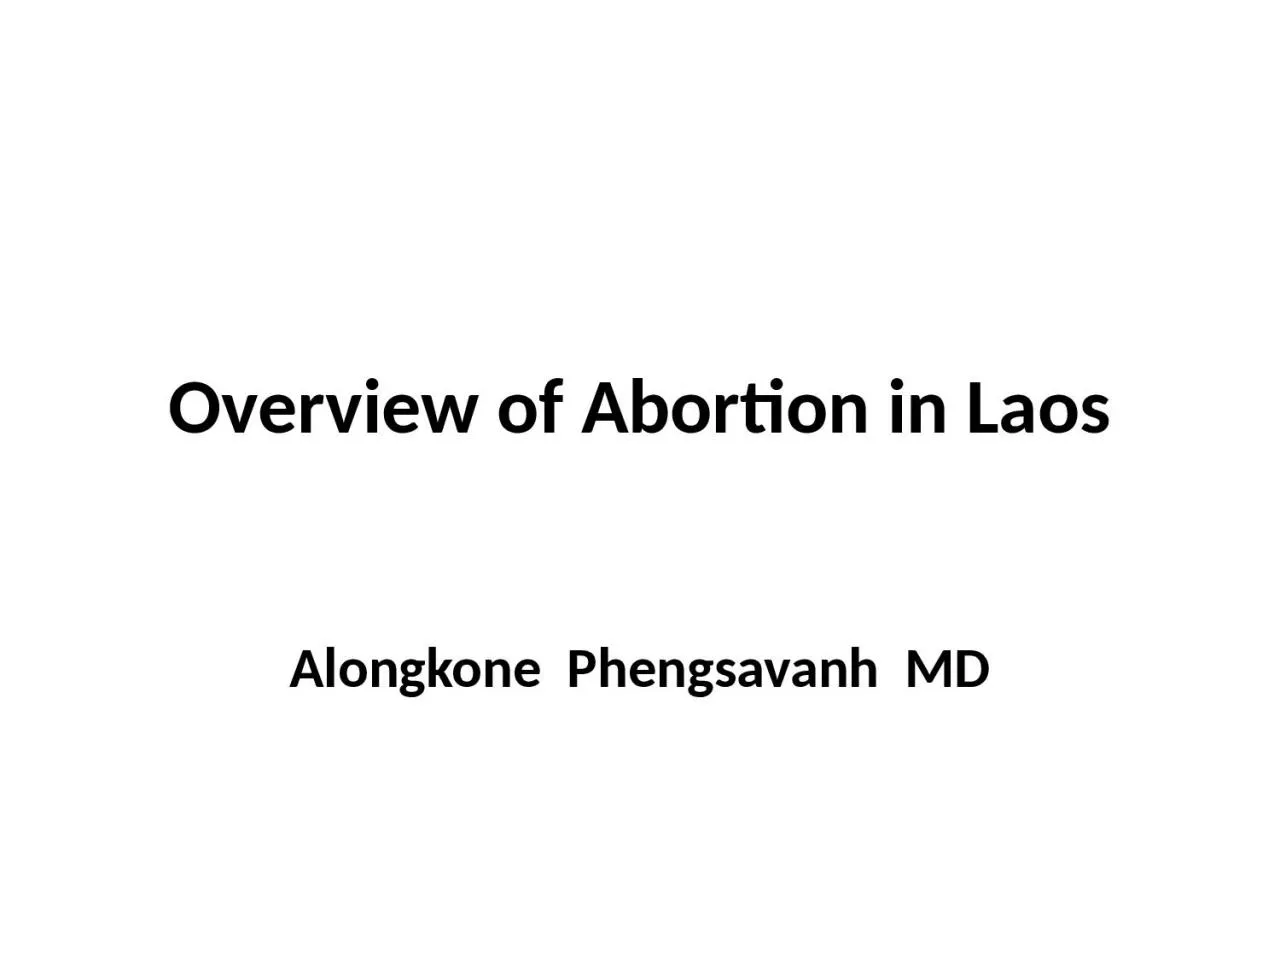 Overview of Abortion in Laos